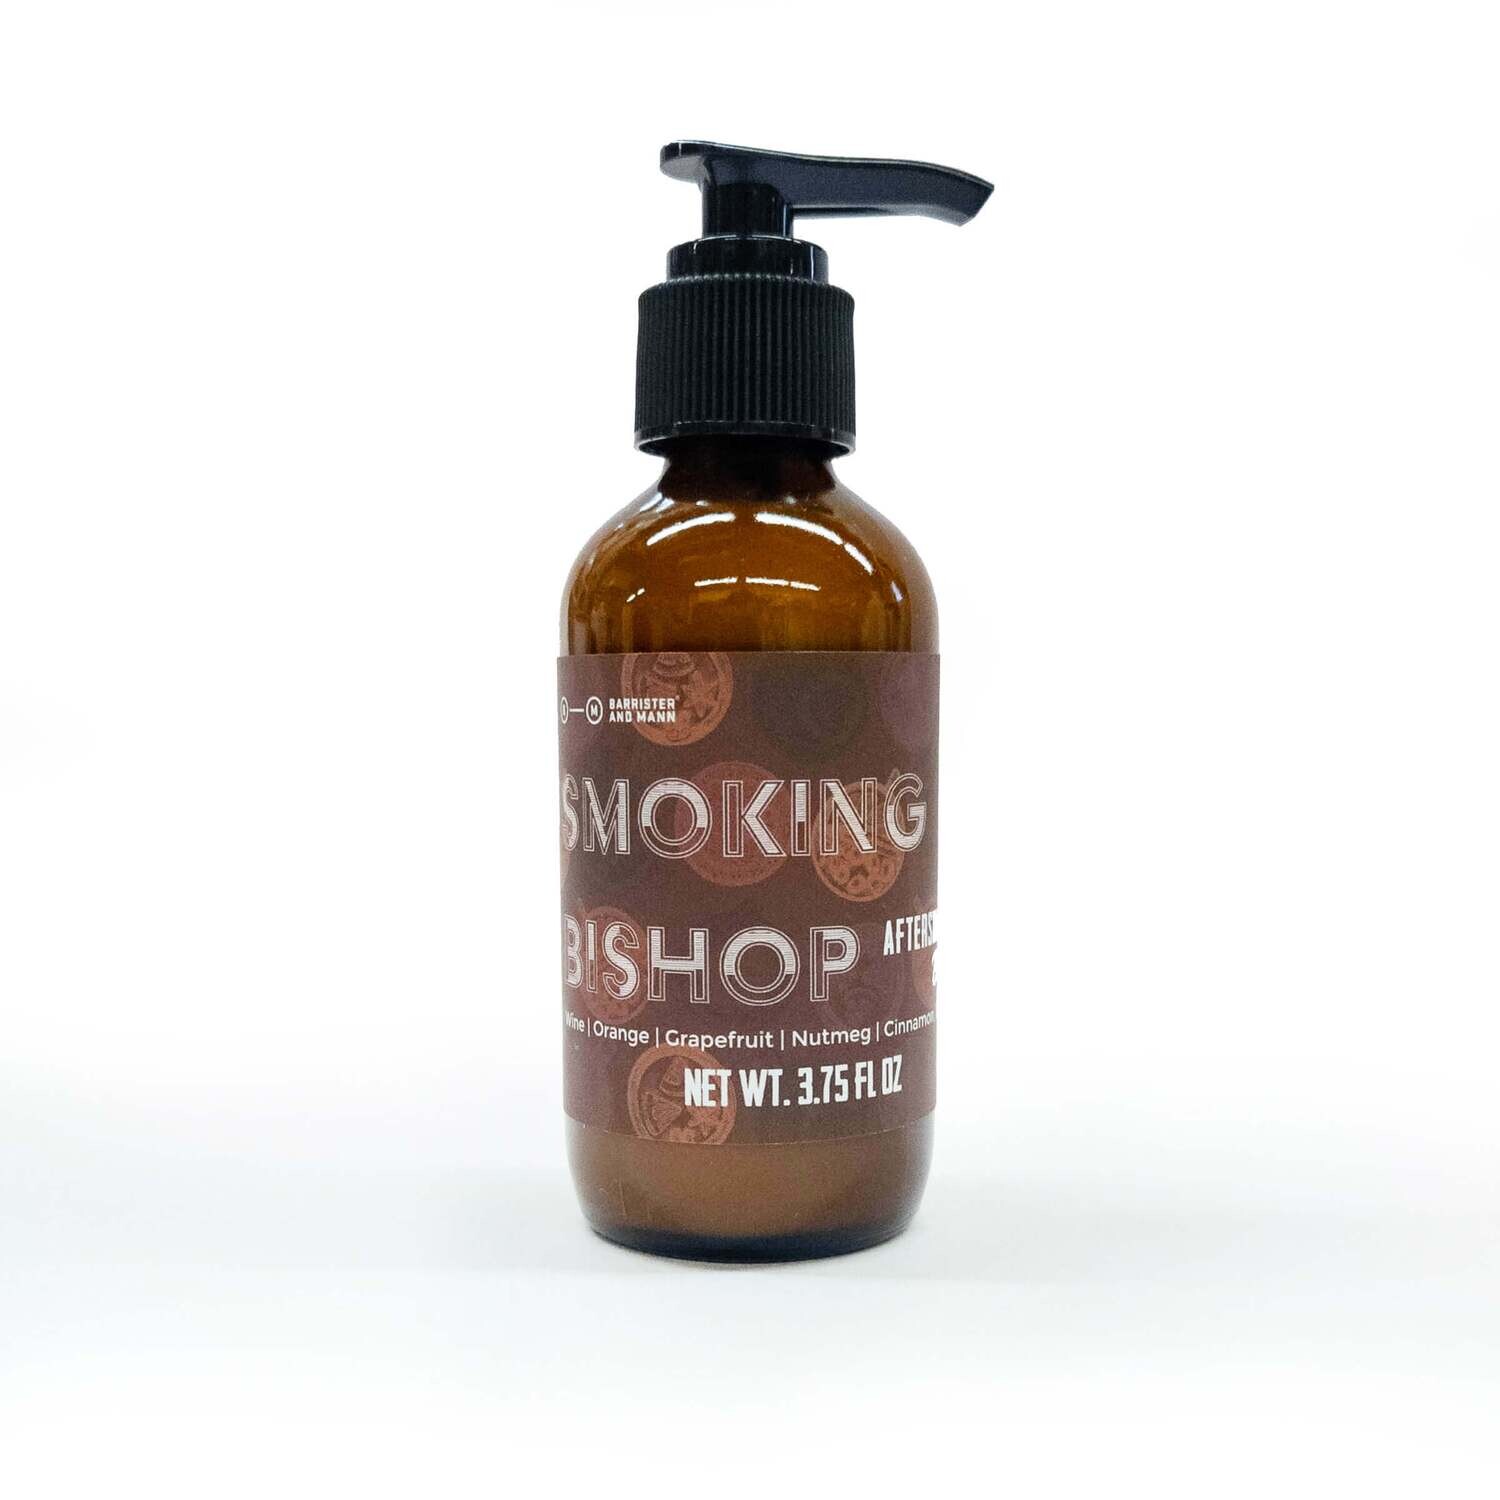 Barrister and Mann Smoking Bishop After Shave Balm